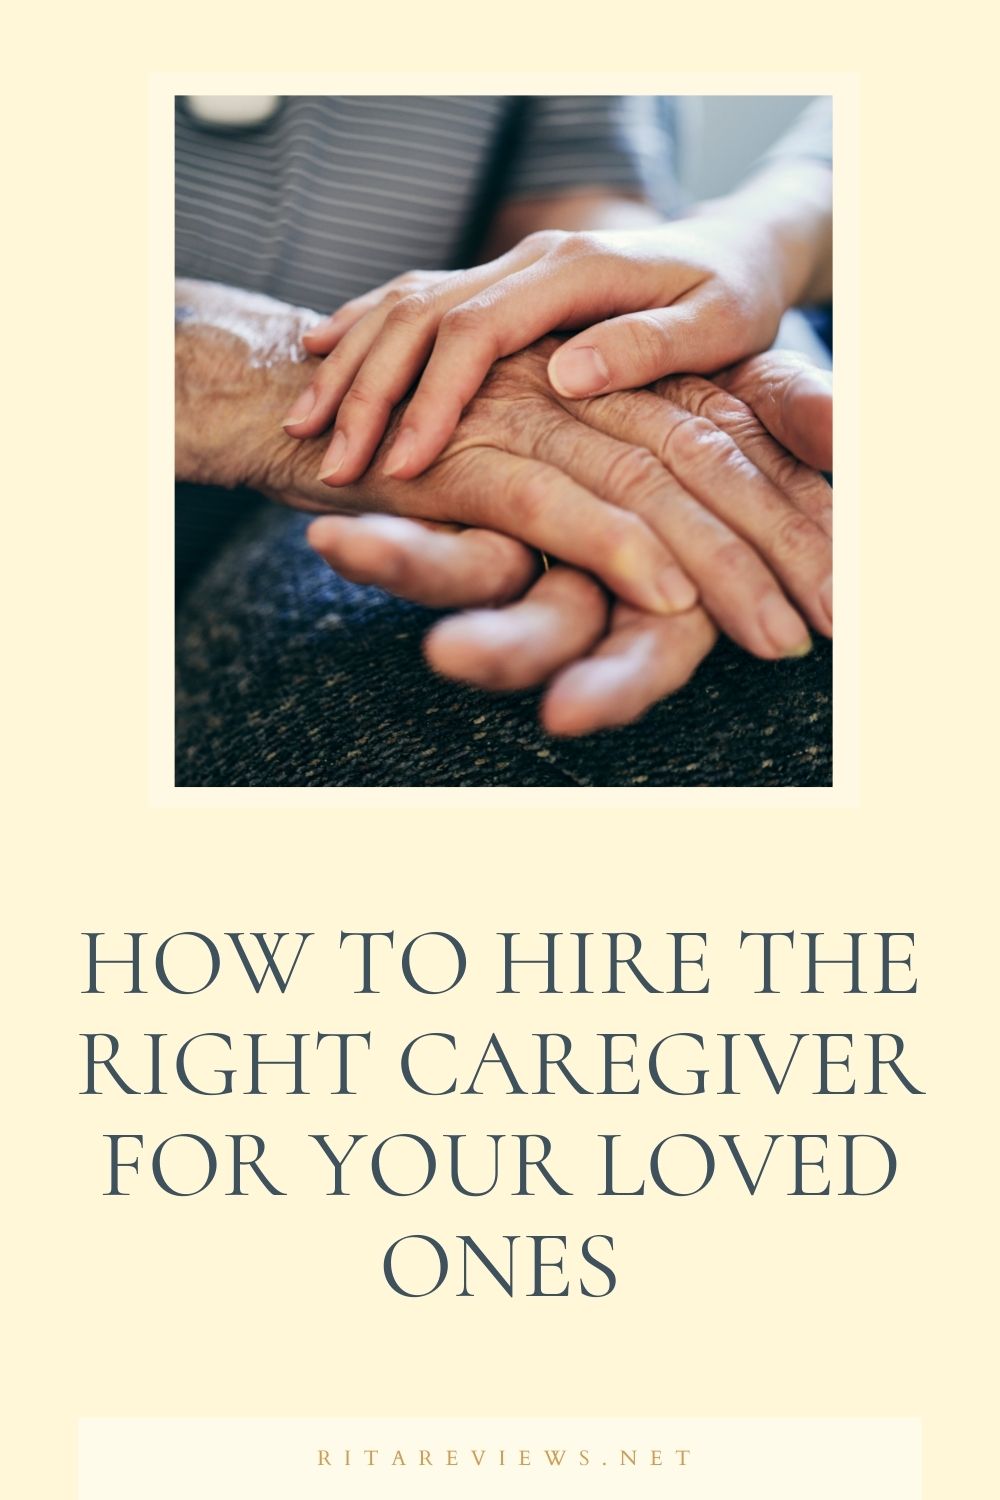 How to Hire the Right Caregiver for Your Loved Ones